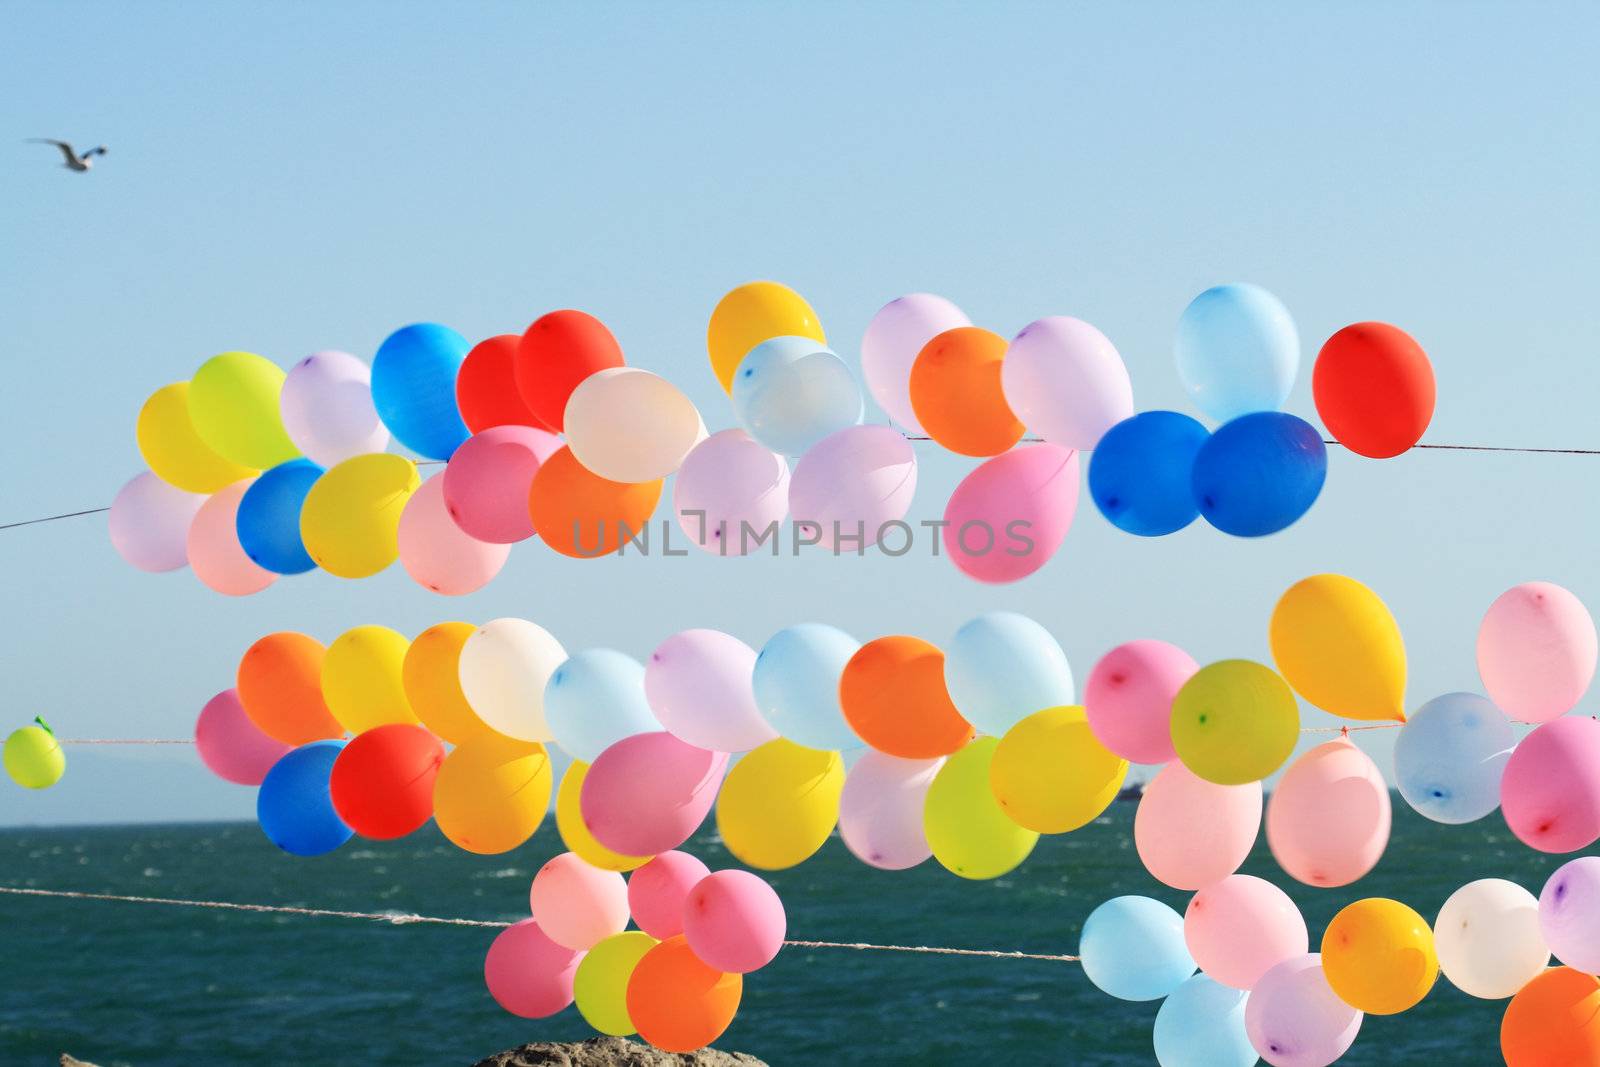 Lots of colorful balloons on background with blue sky and sea